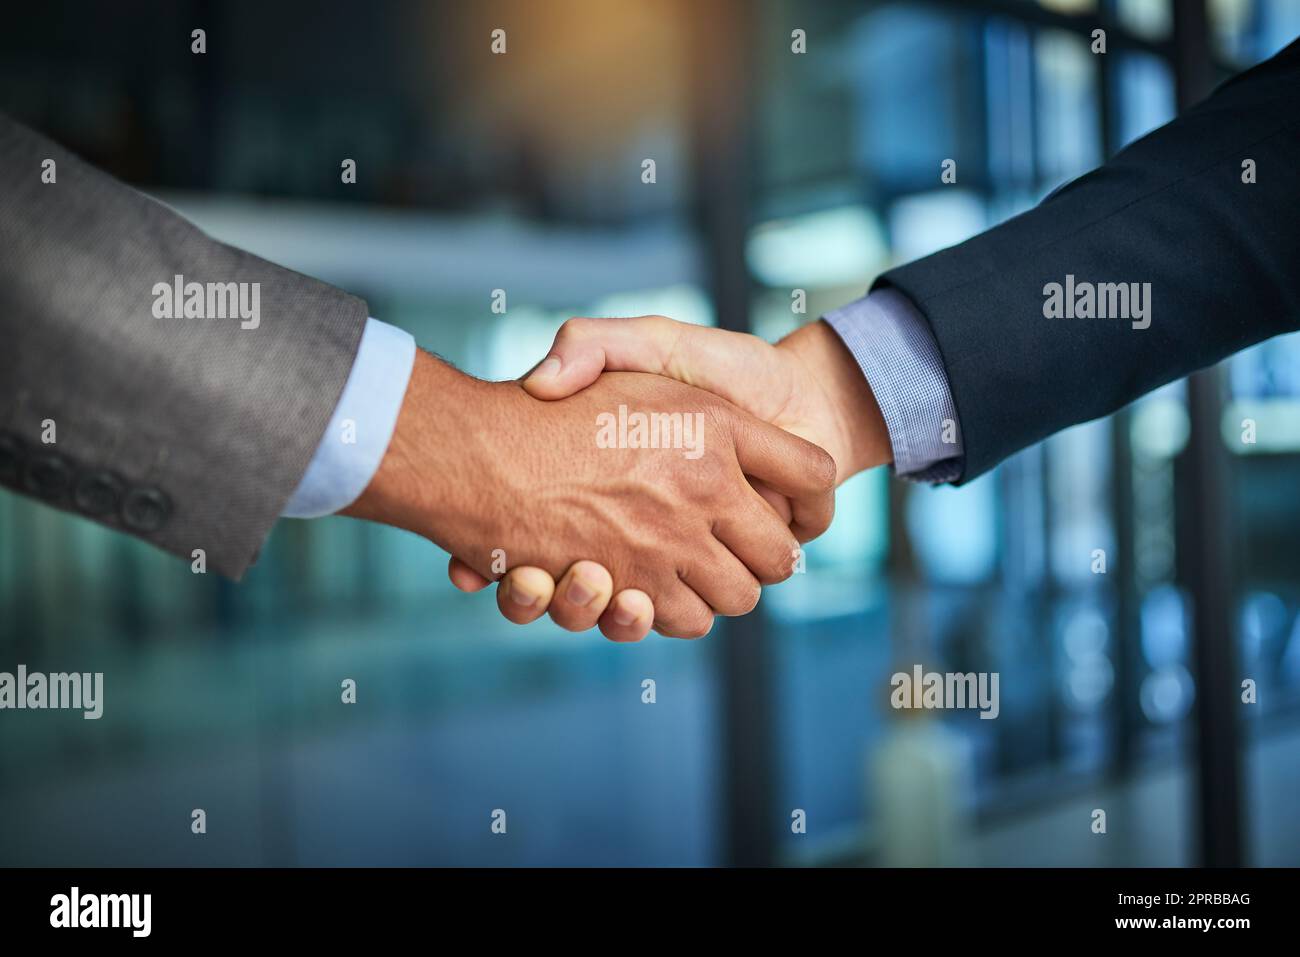 A handshake showing teamwork, collaboration and togetherness by business colleagues after a meeting in the office. A successful agreement has been reached by male coworkers in a business deal Stock Photo